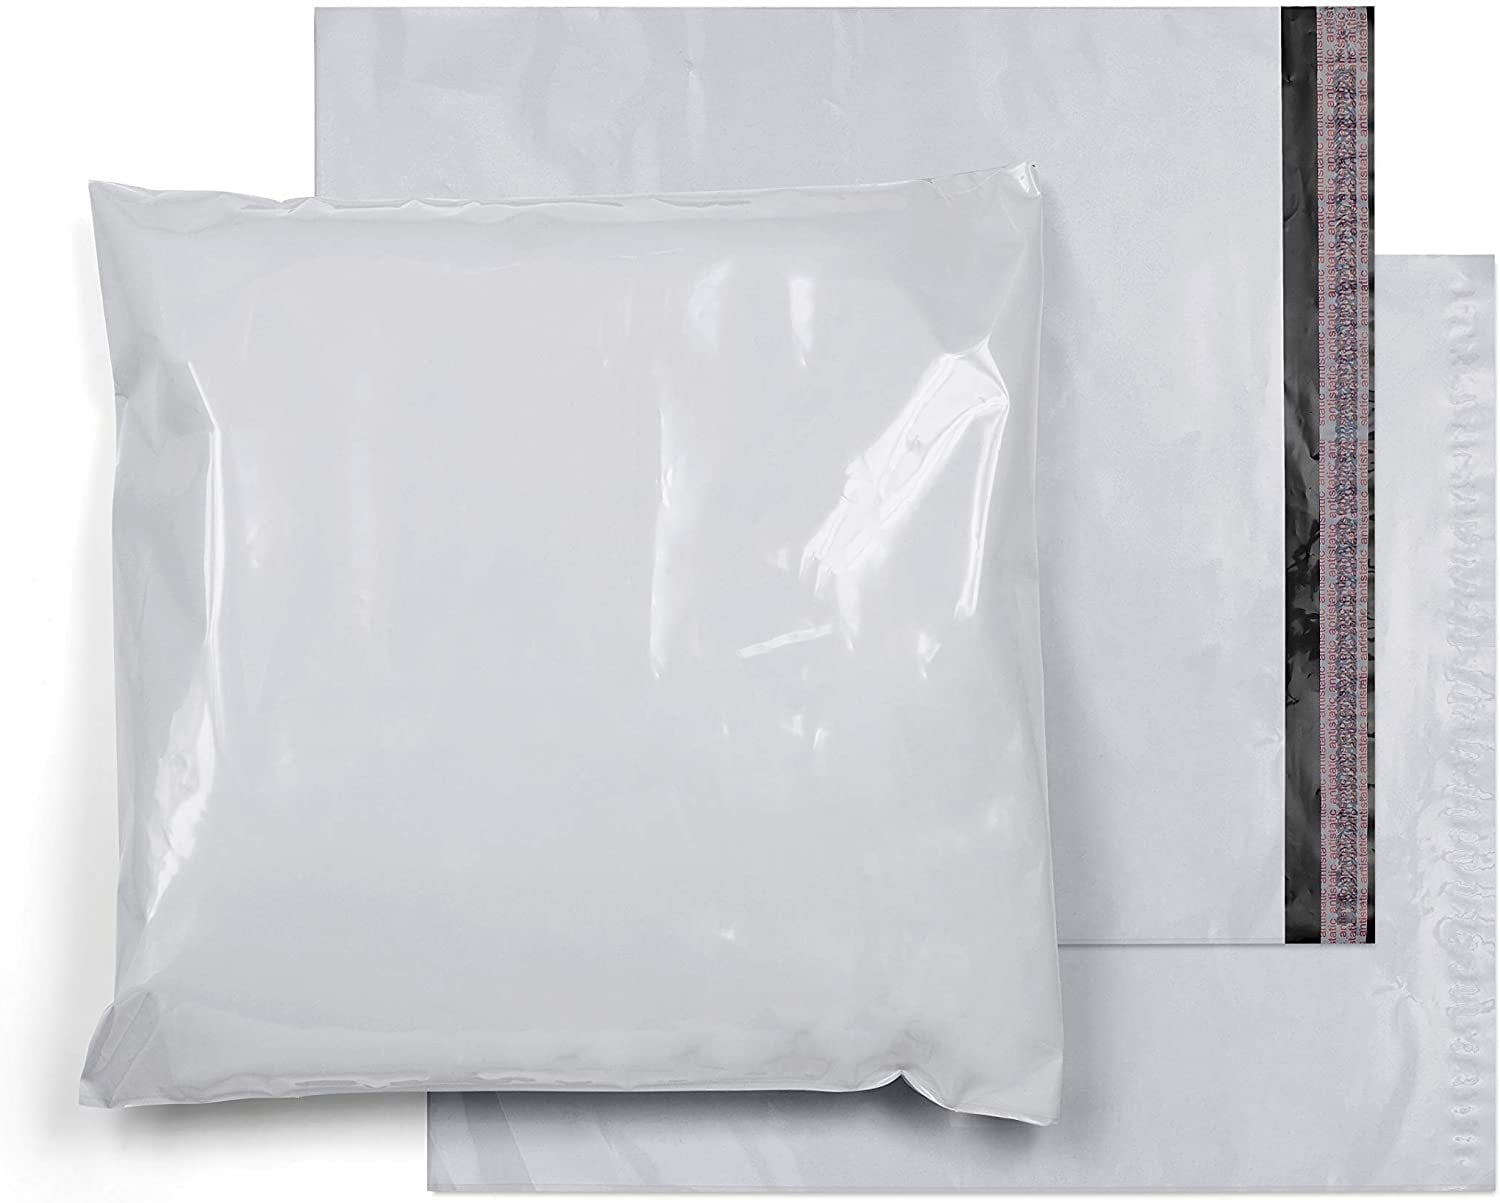 Secure Seal by Shipping Depot 10 Pack of 24x24 White Poly Mailers Self Sealing Envelope Plastic Bags 24”x24” #9 